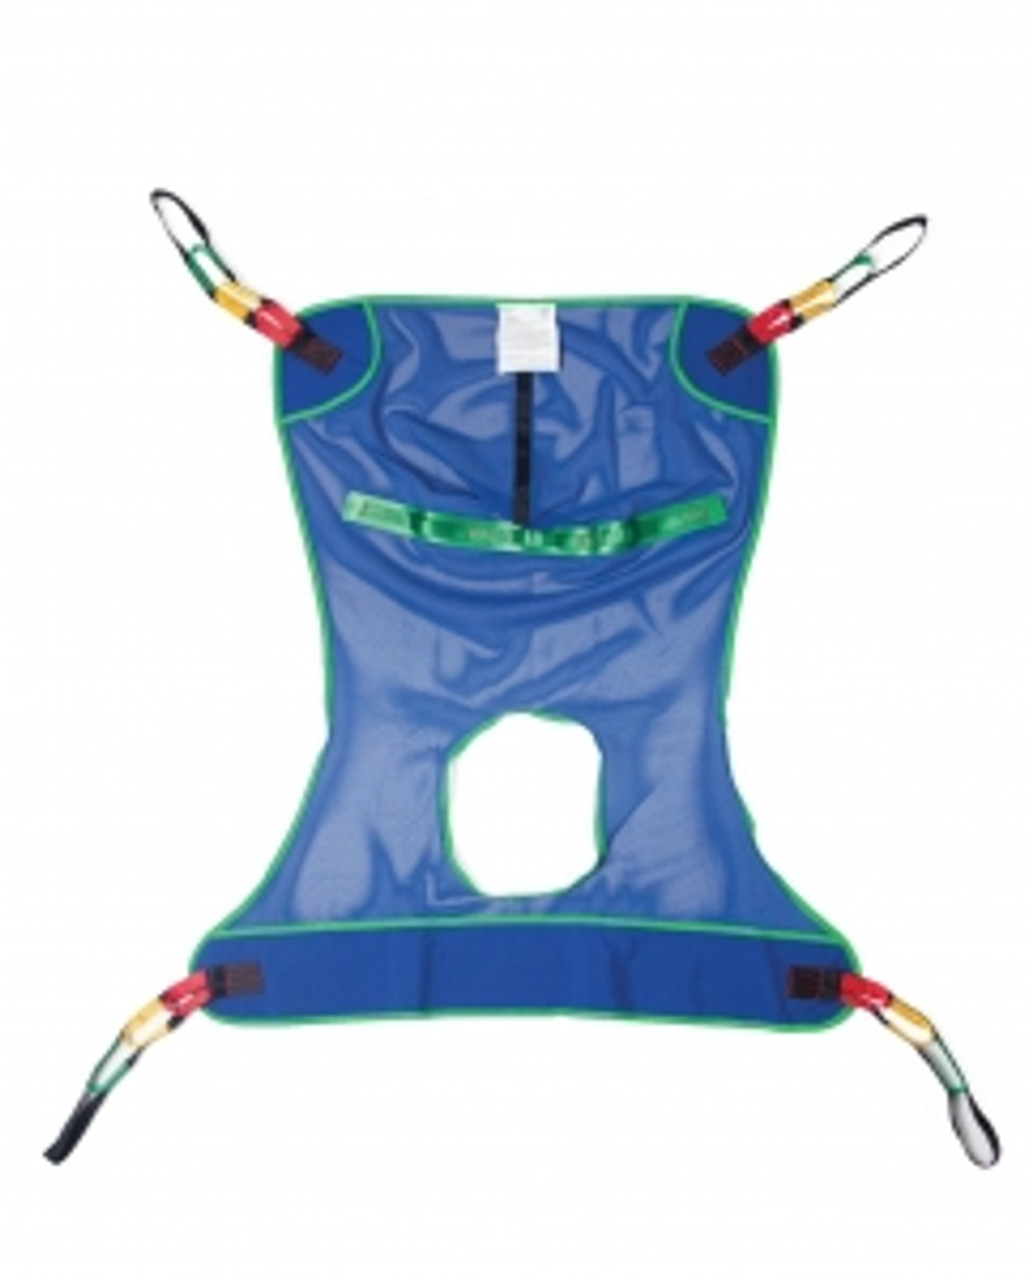 Designed with comfort and safety in mind, the full-body slings have a 4-point hookup
Can be used with either 4-point or 6-point lift cradles